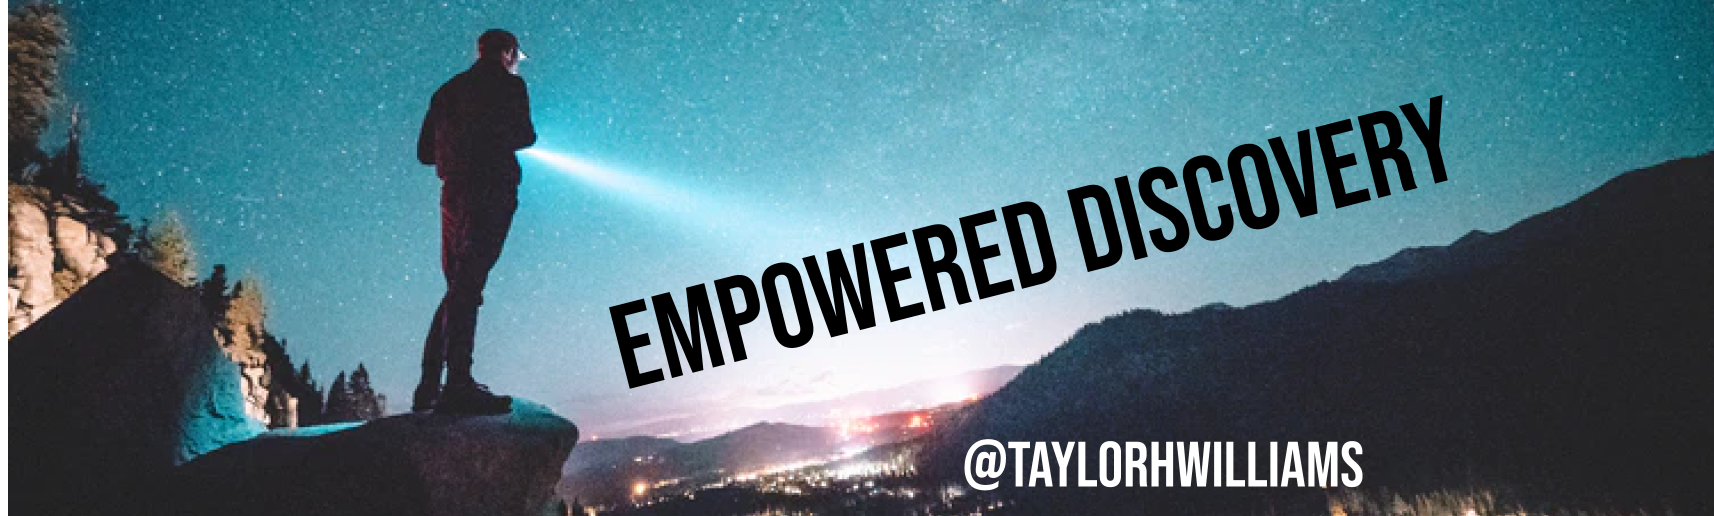 Empowered Discover by @taylorhwilliams